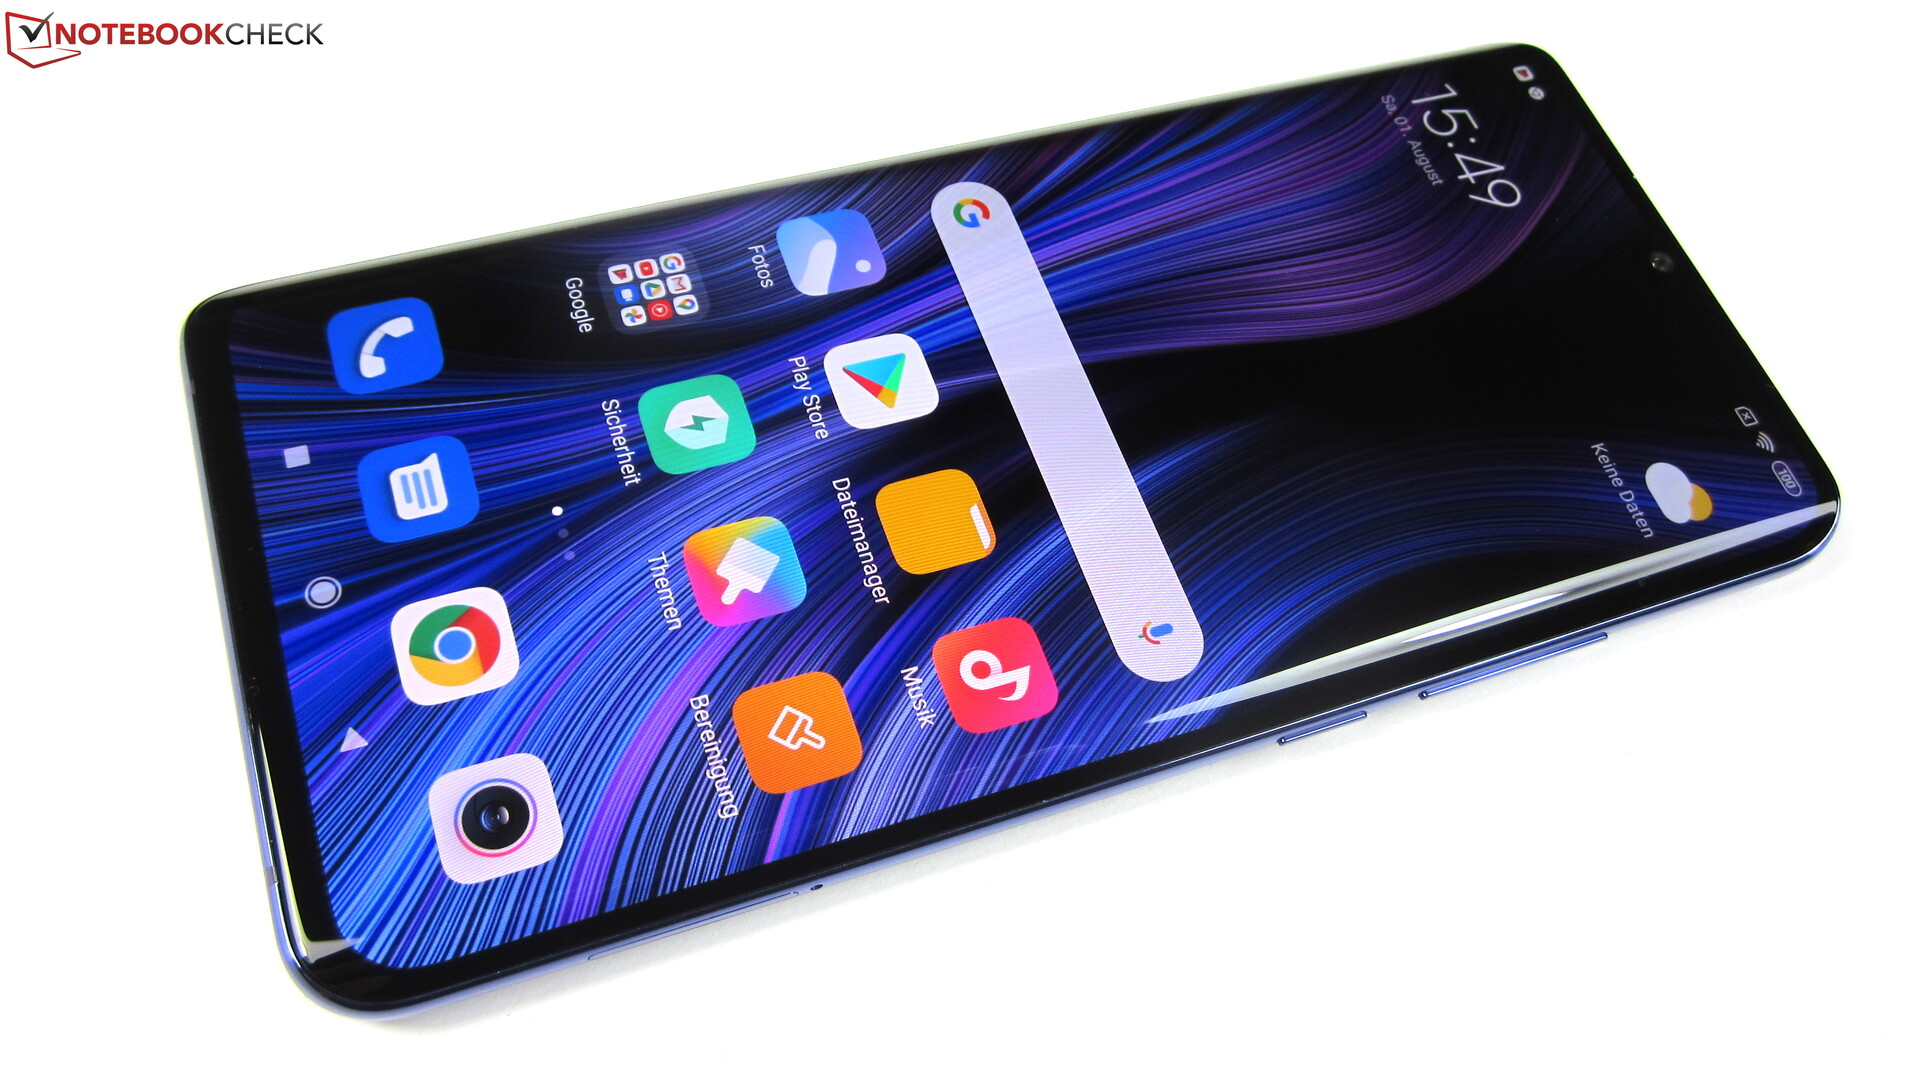 Xiaomi Mi Note 10 Lite: Smartphone with a lot to offer for the price -   News